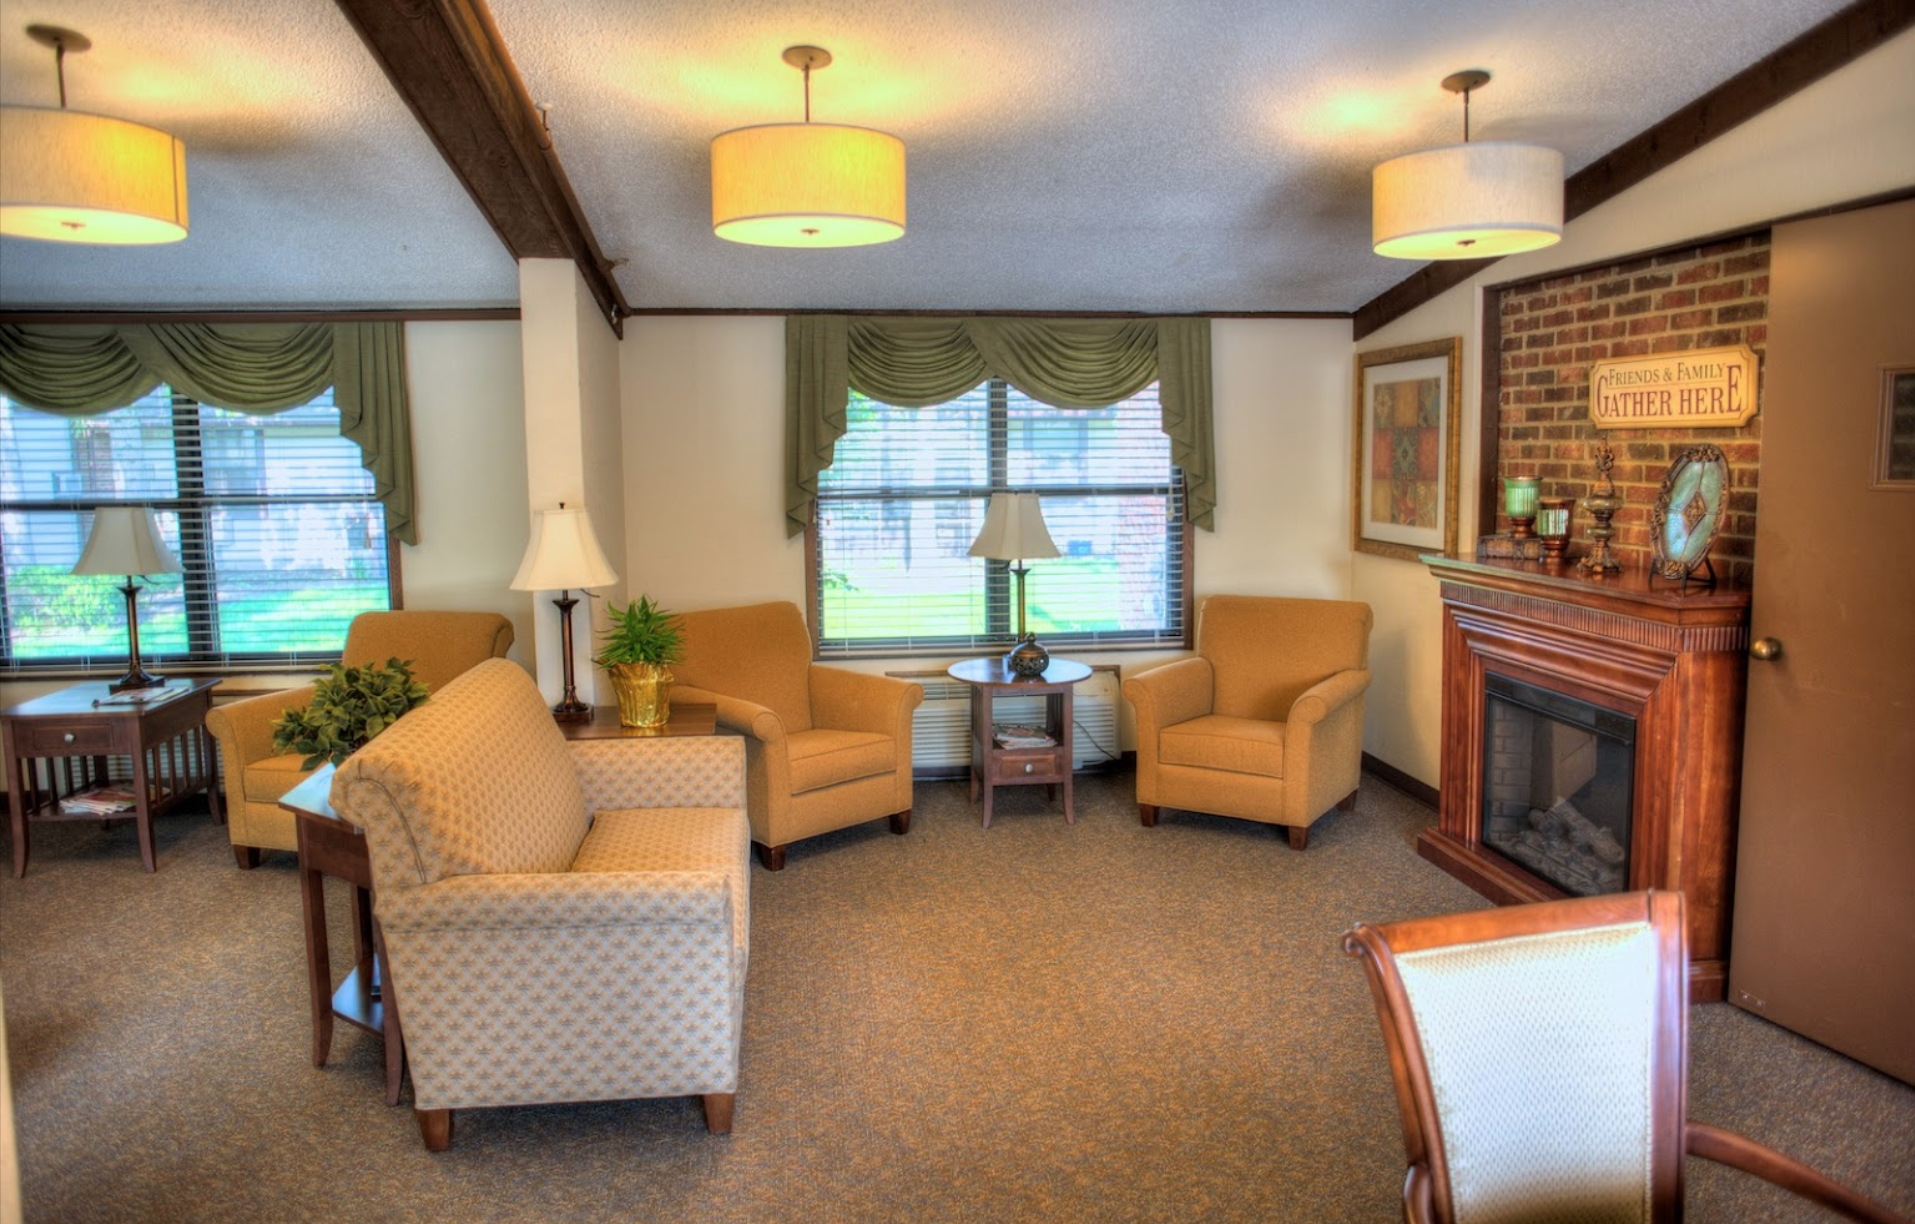 Springfield Assisted Living - Common Living Room